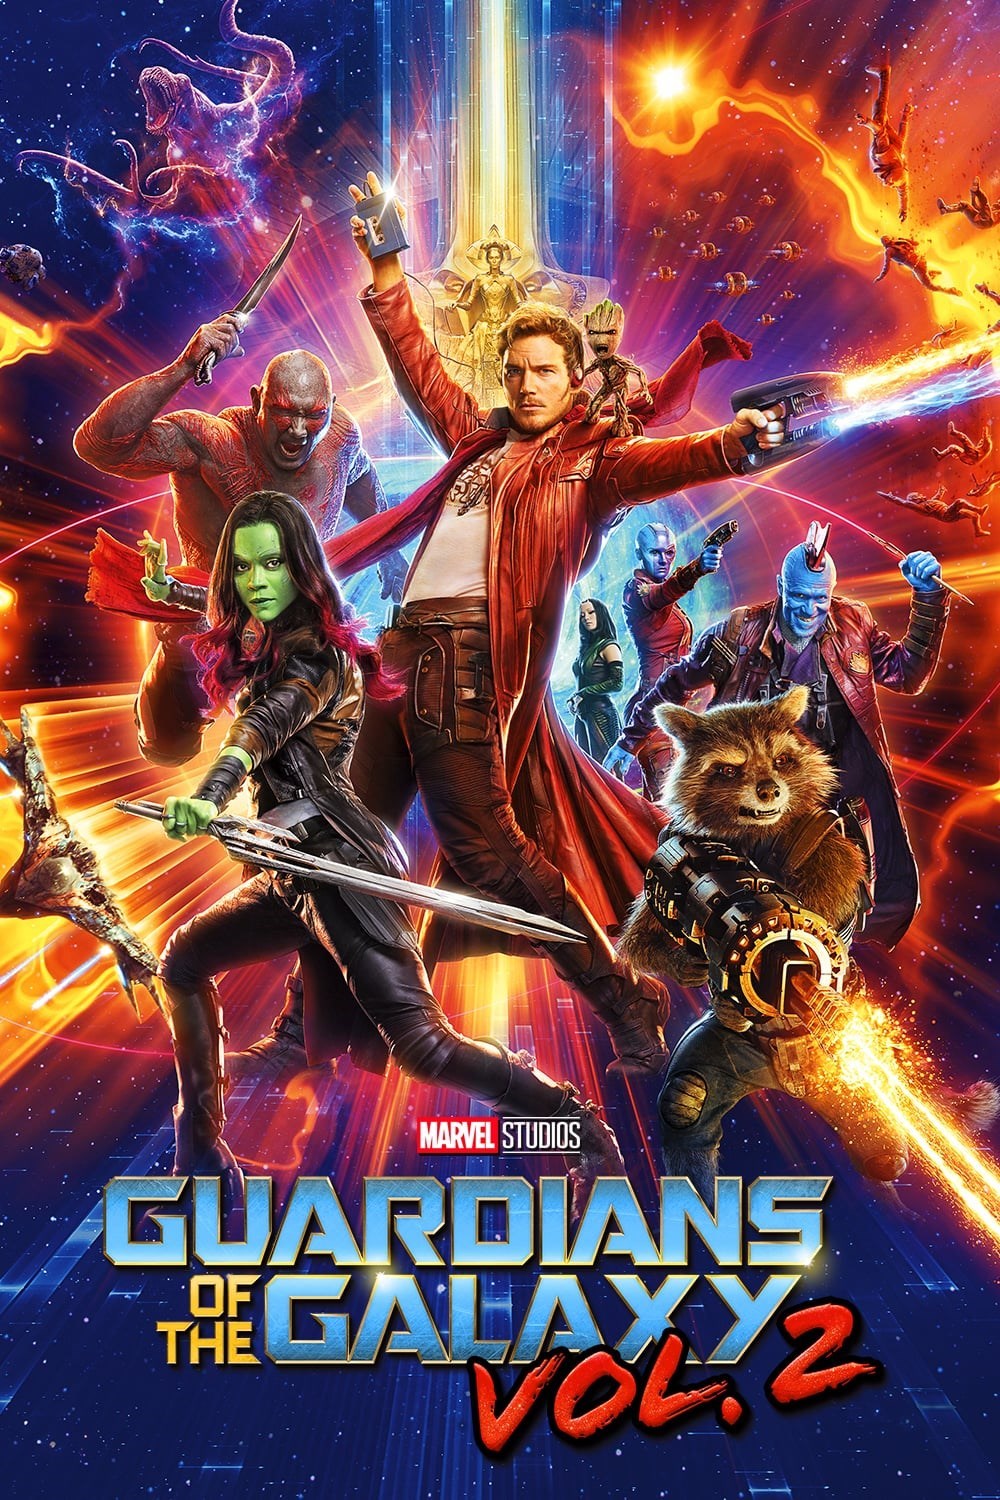 Guardians of the galaxy vol2 2017 4k quality